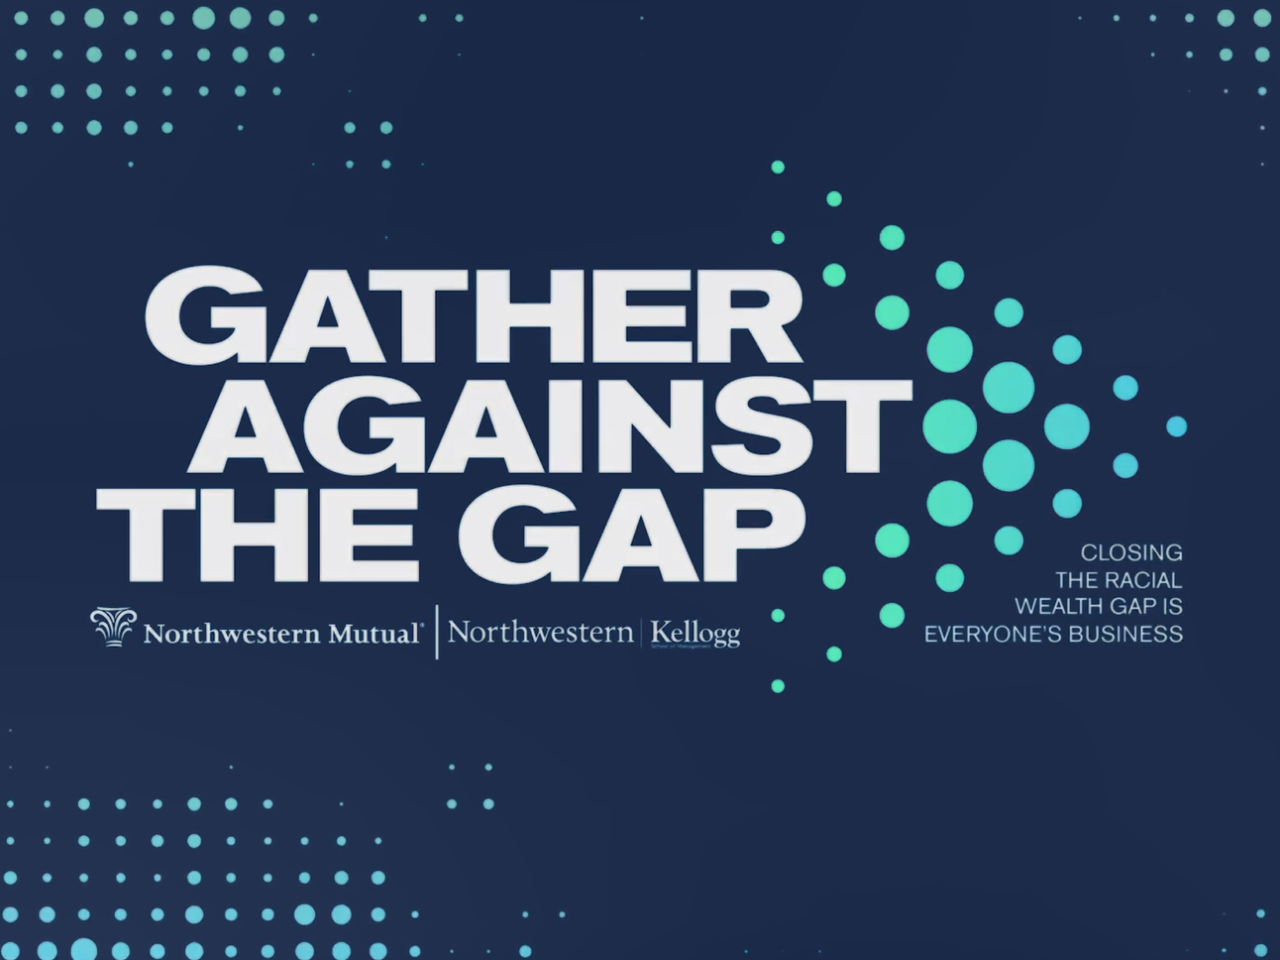 "Gather Against the Gap"